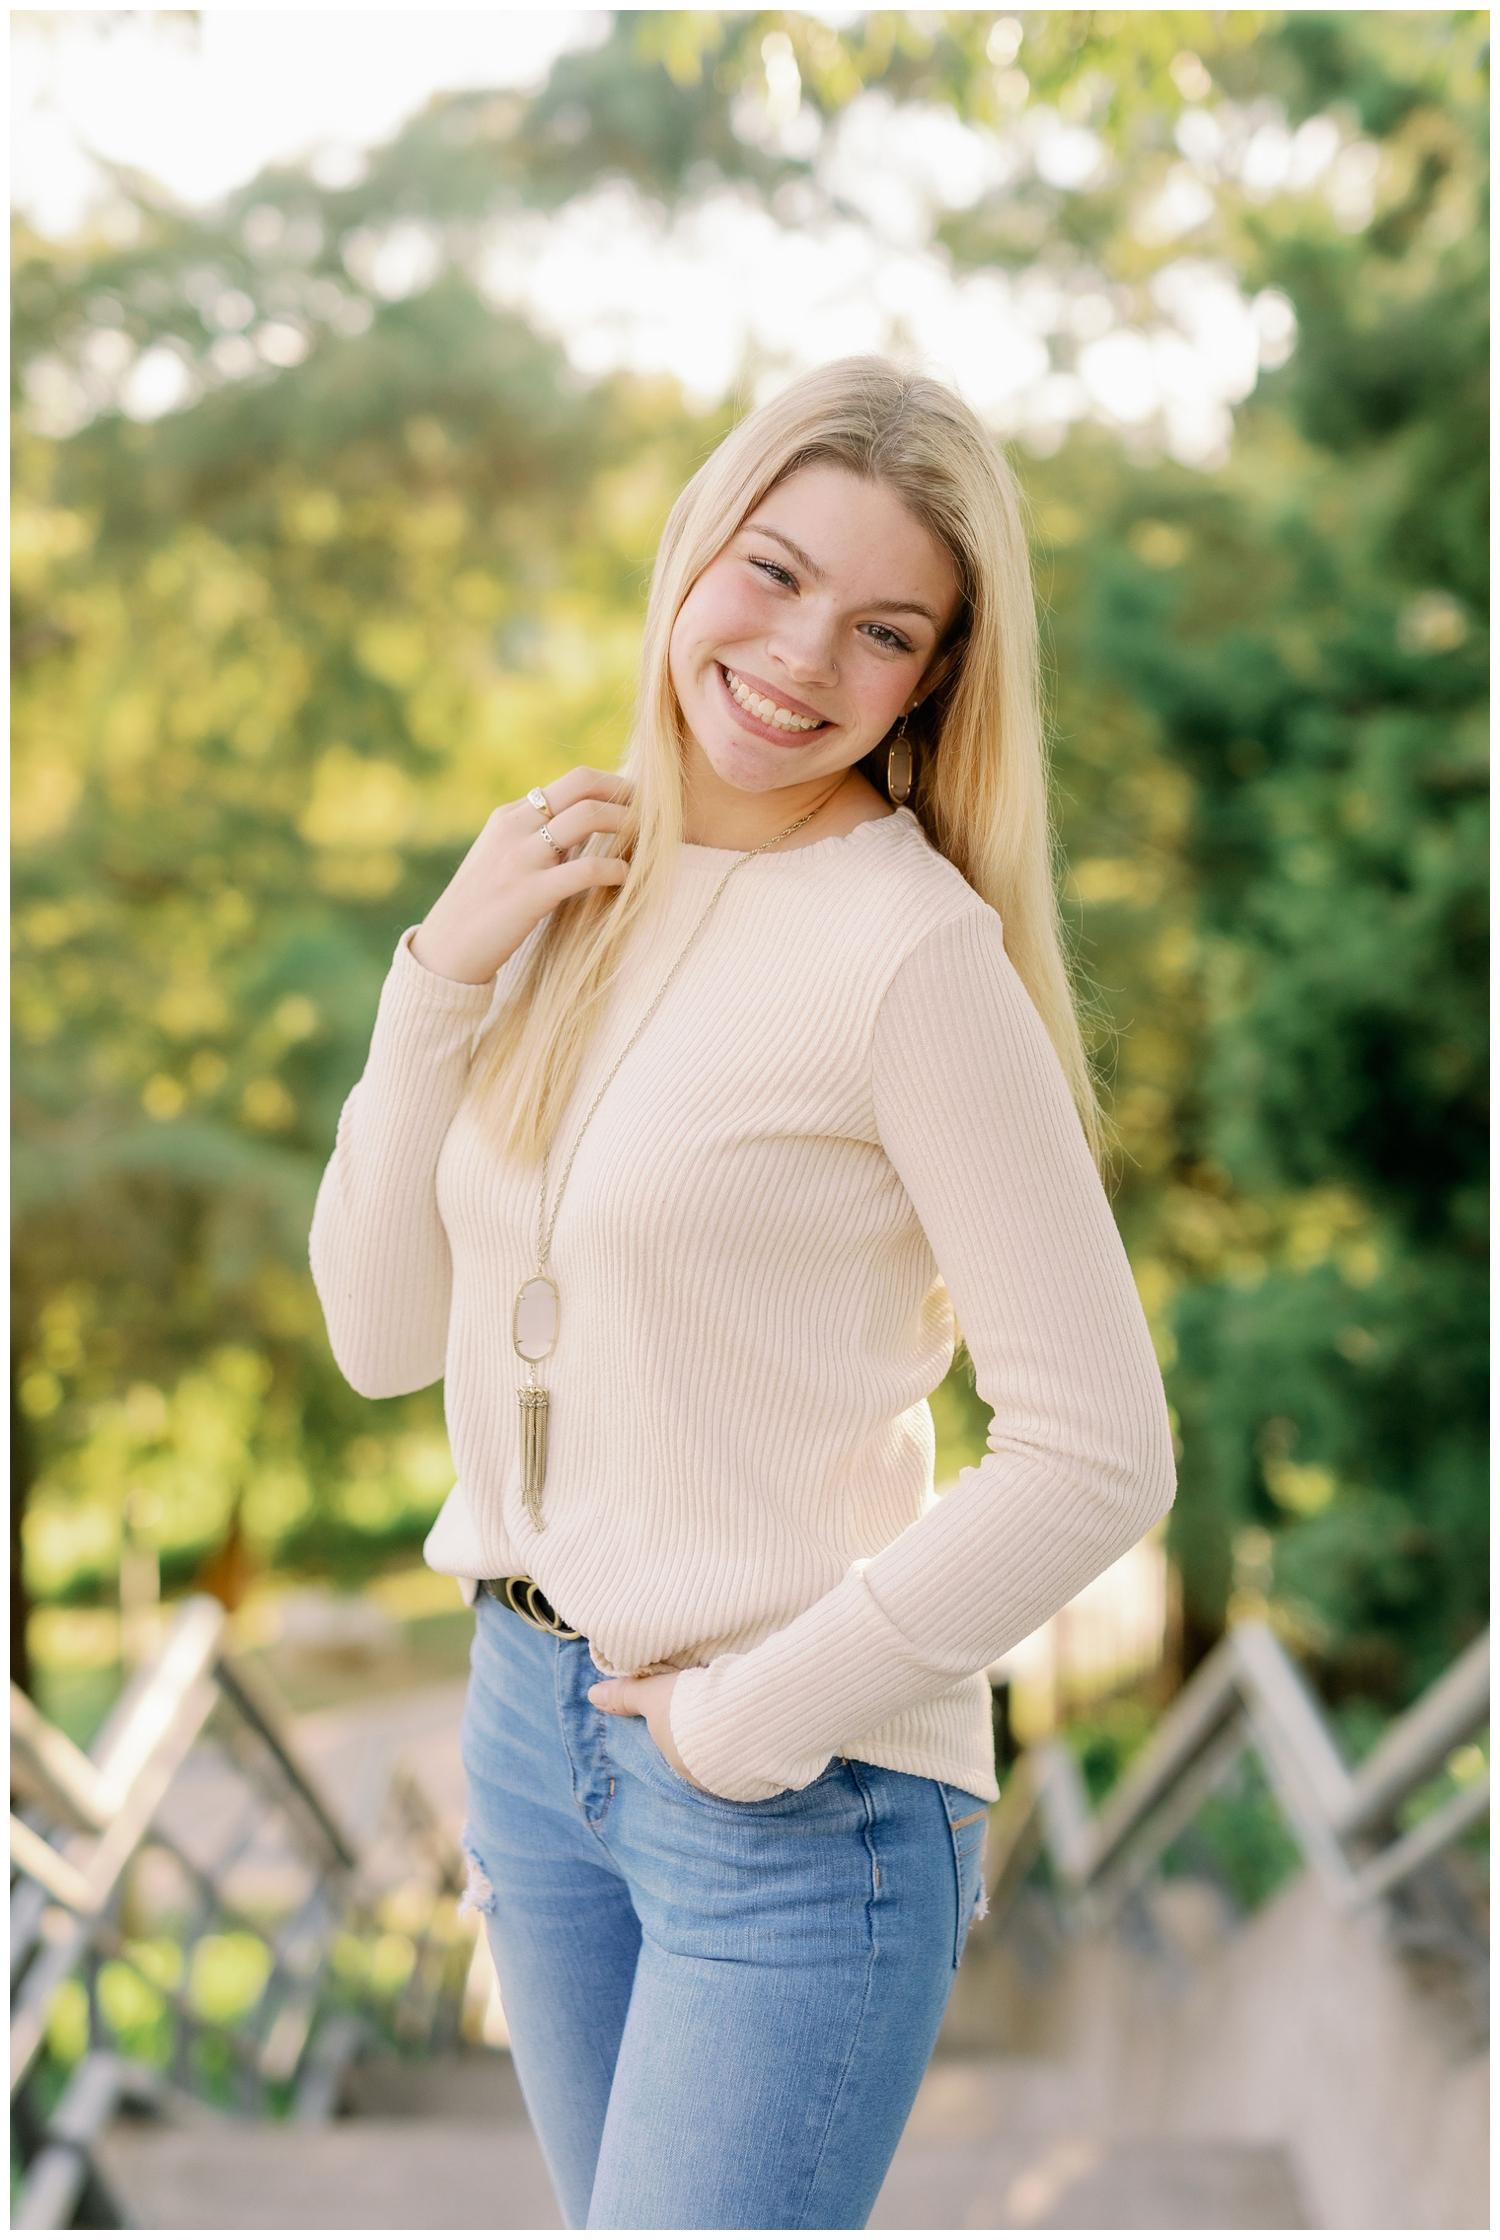 girl in jeans and cream sweater smiling Senior Pictures South Boulevard